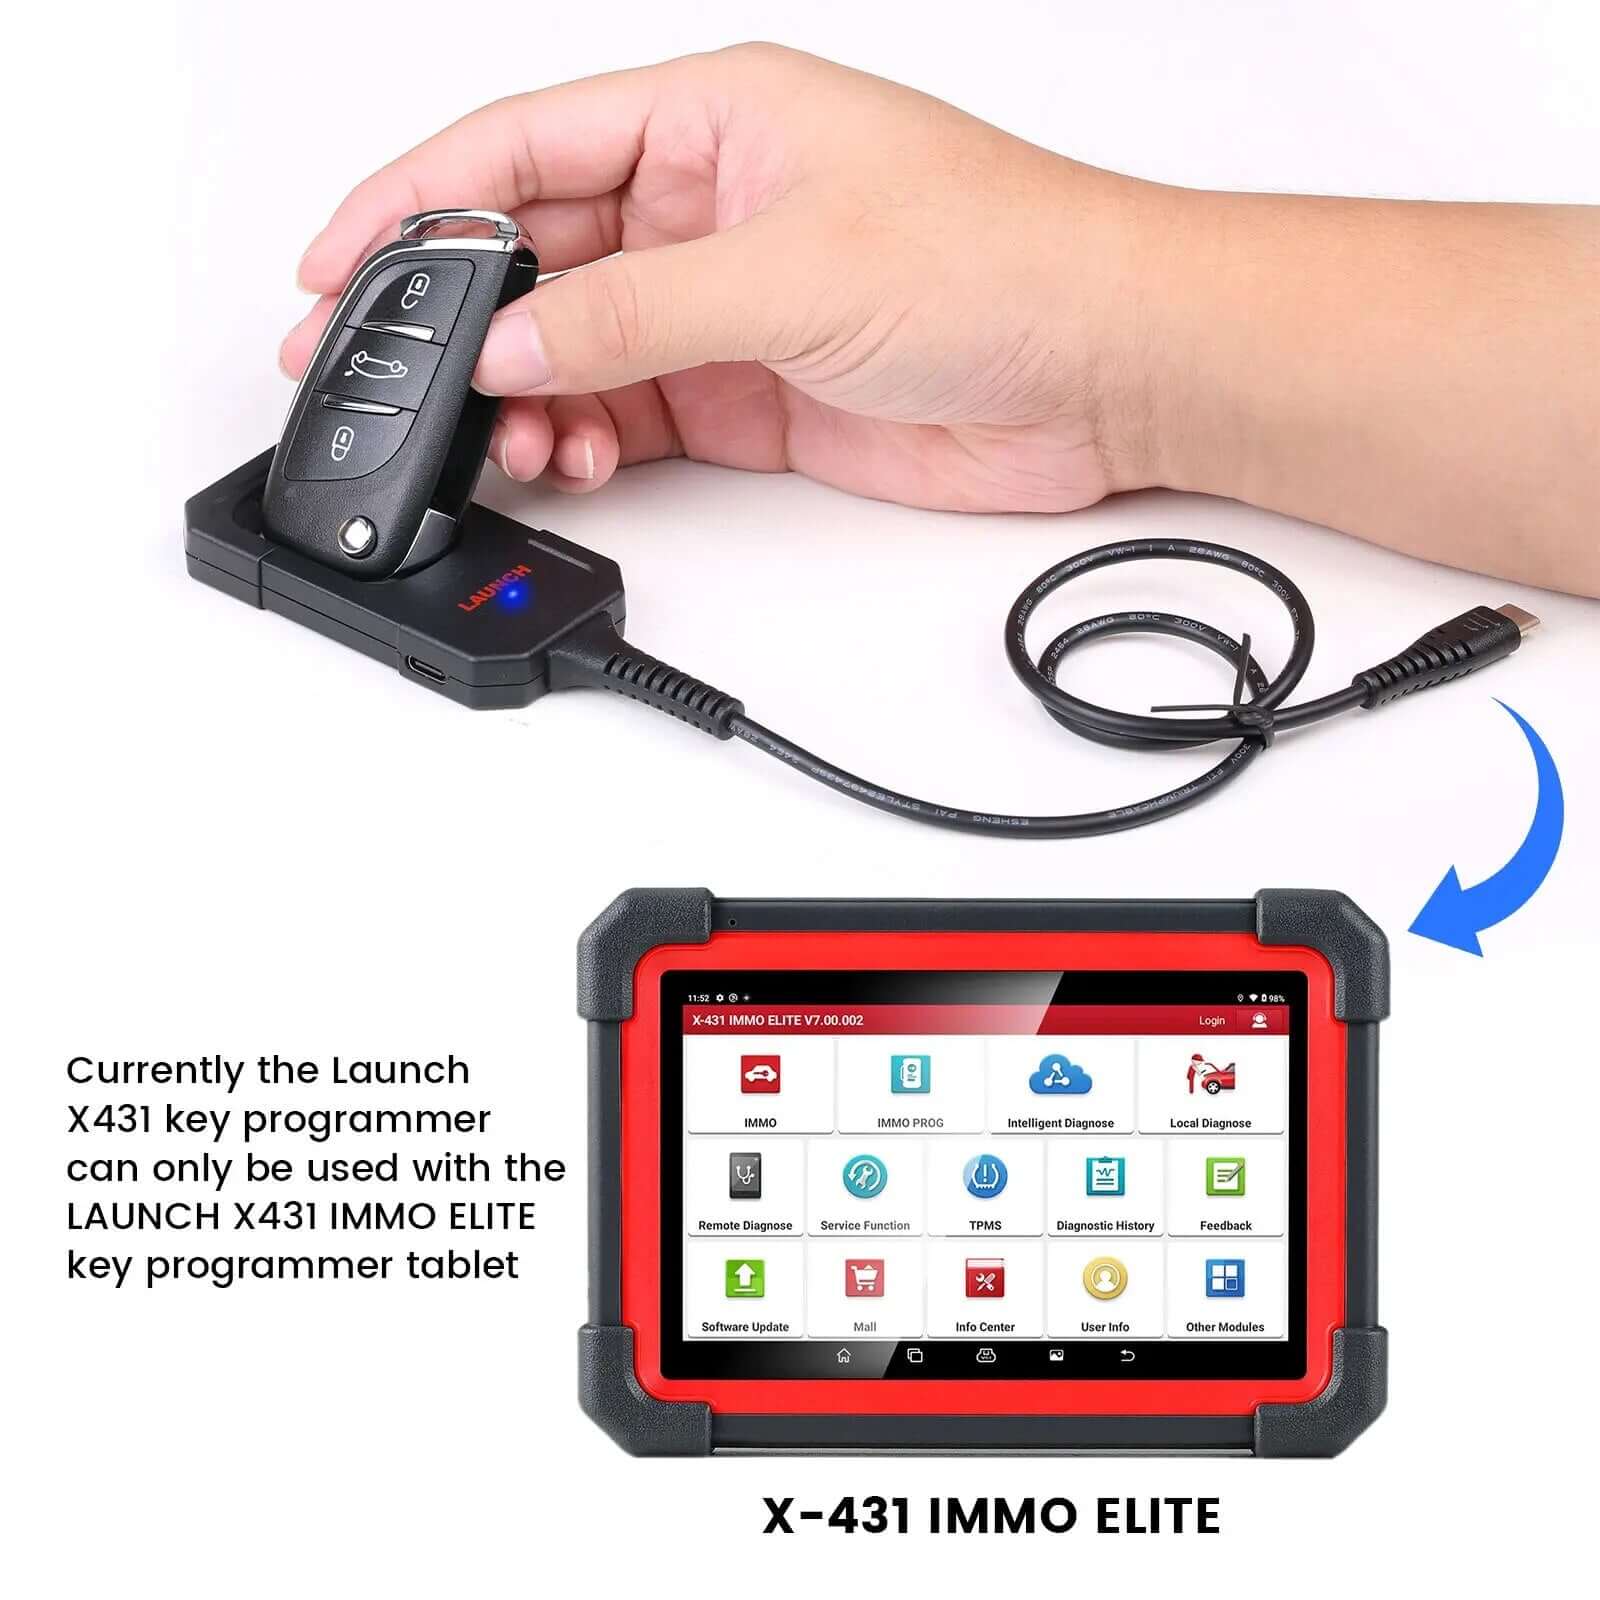 Launch X431 Key Programmer Remote Maker with 4PCS Universal Remote Key and 1PCS Super Chip for X431 IMMO Elte/IMMO Plus/pad V